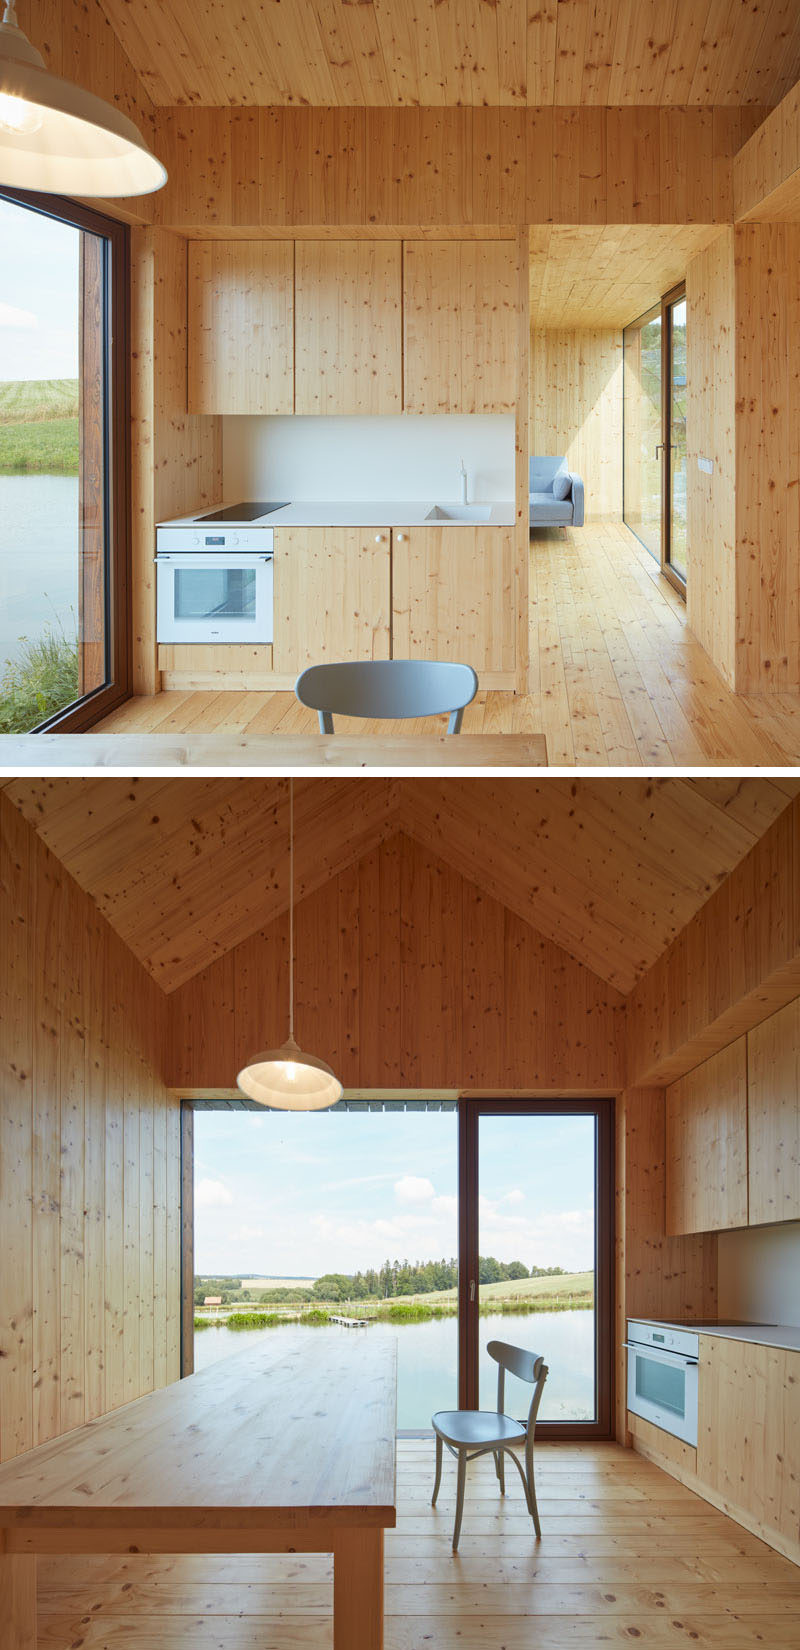 Atelier 111 have designed this small wood cottage that sits on the bank of a pond, and was inspired by traditional fisherman's cabins. #ModernCottage #ModernCabin #WoodCabin #Architecture